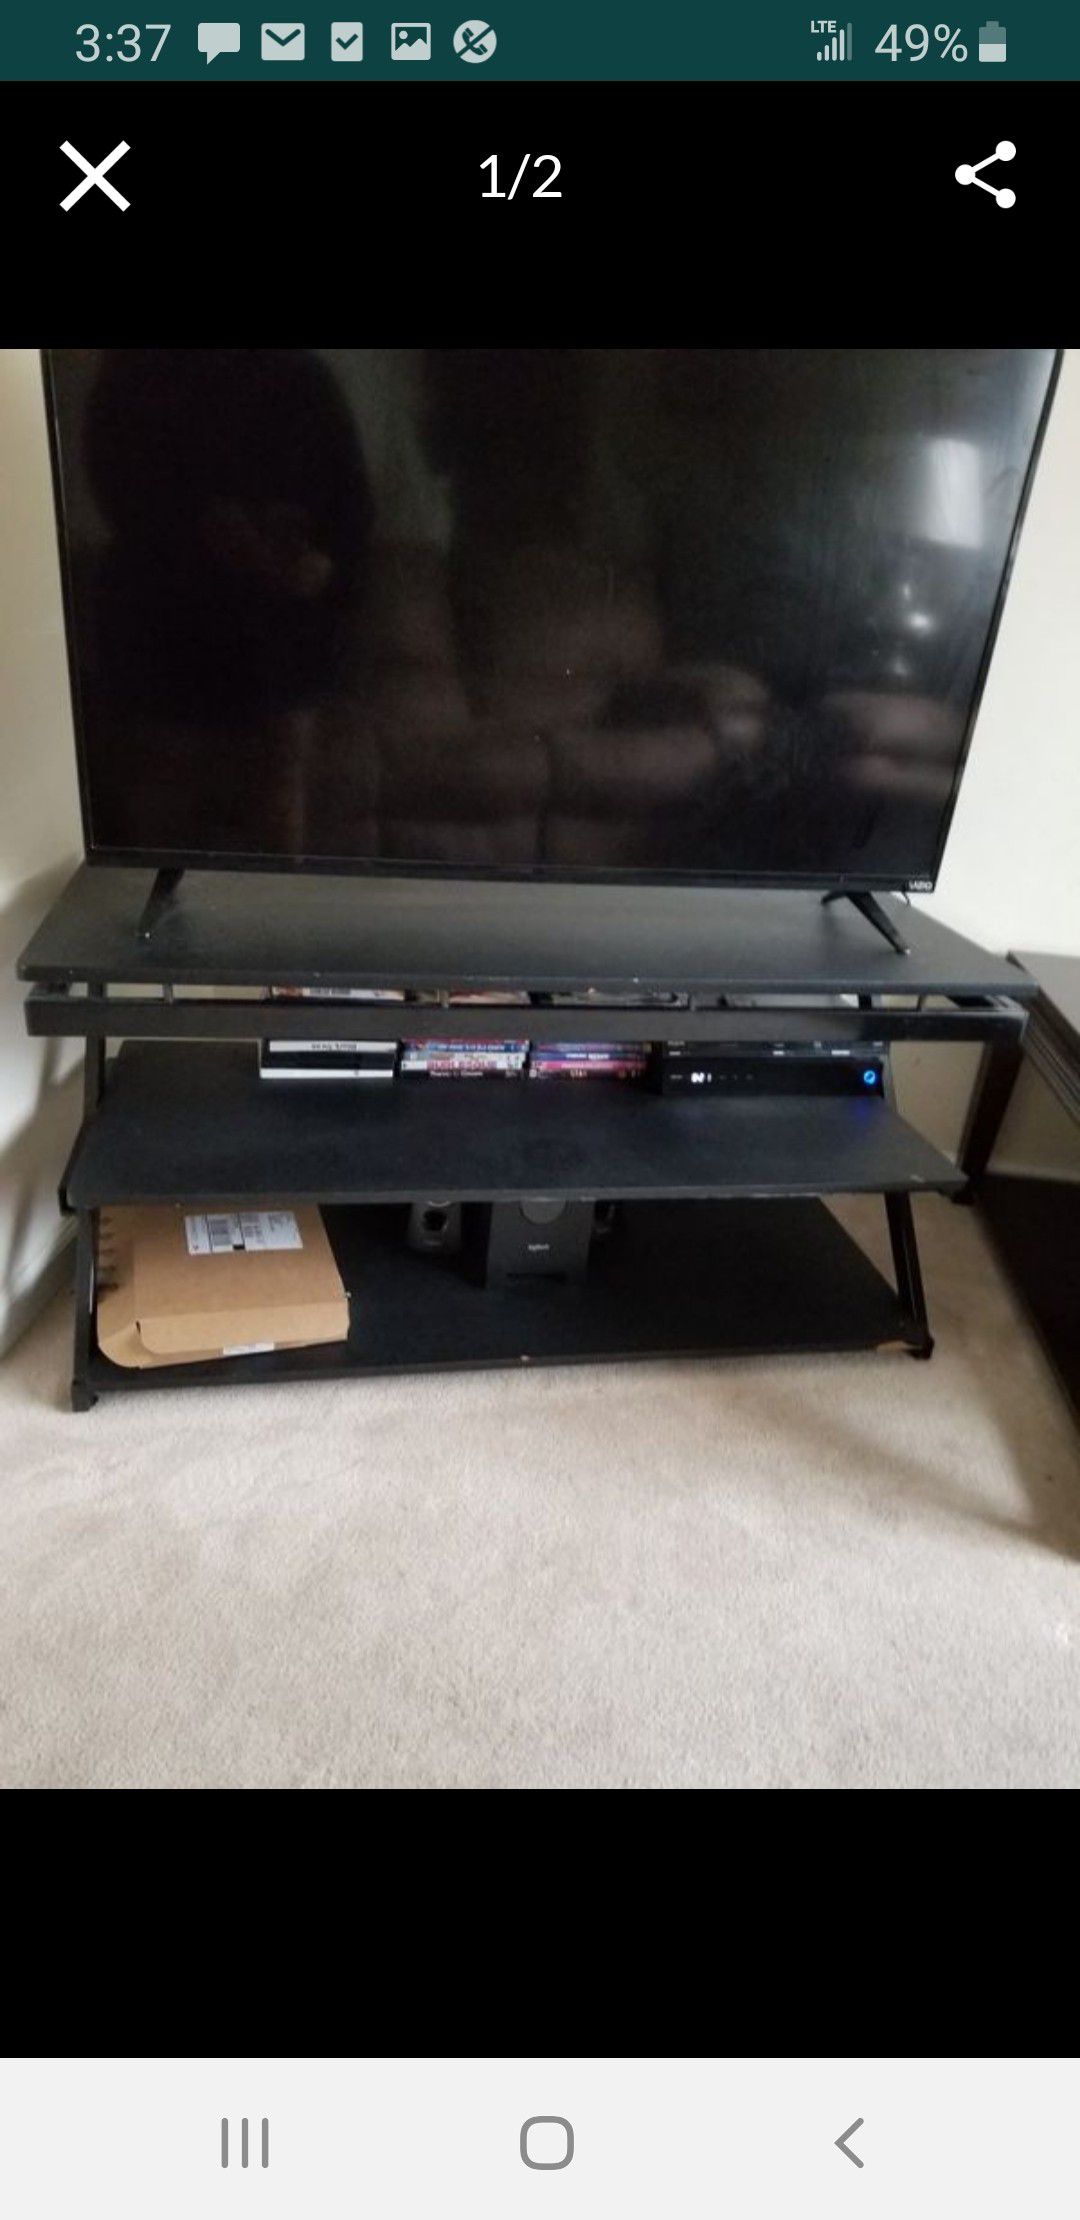 Used 3 shelve entertainment center tv not included